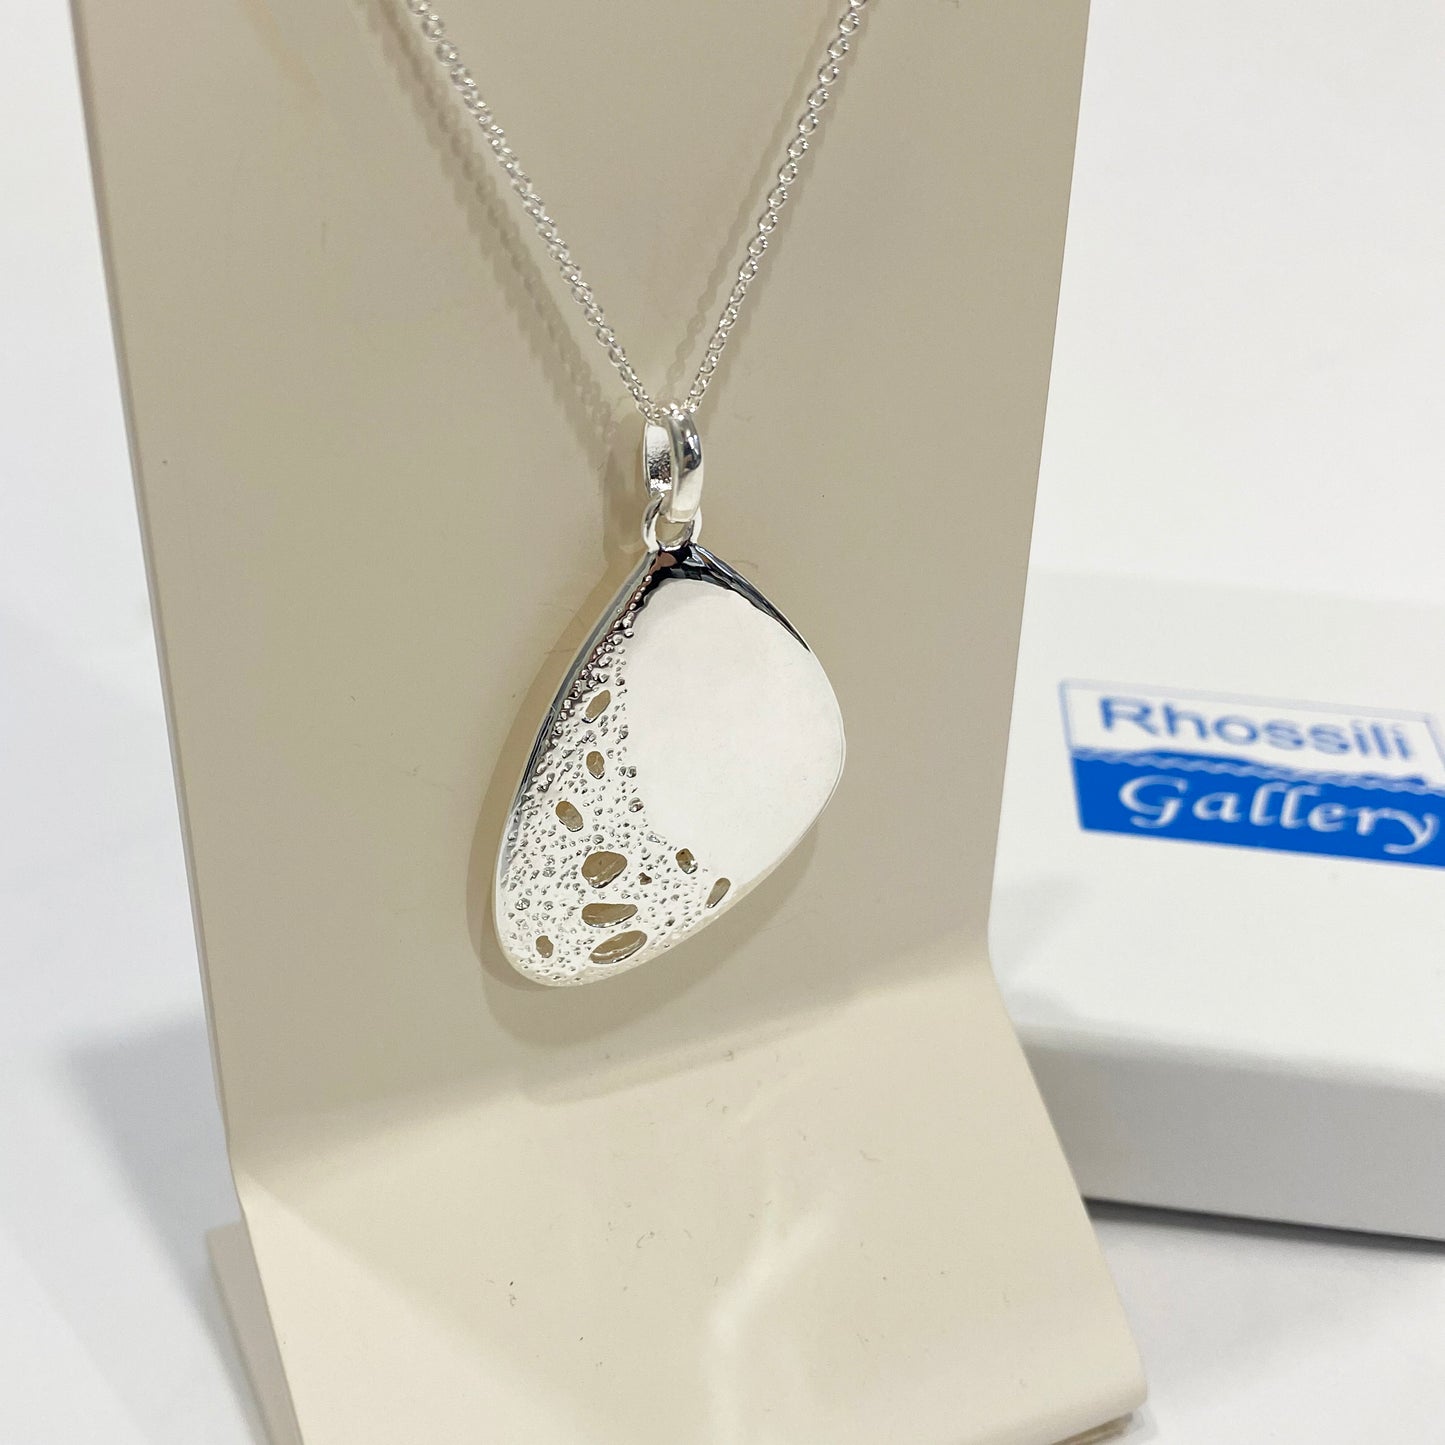 Silver Open Pendant With A Textured Surface.